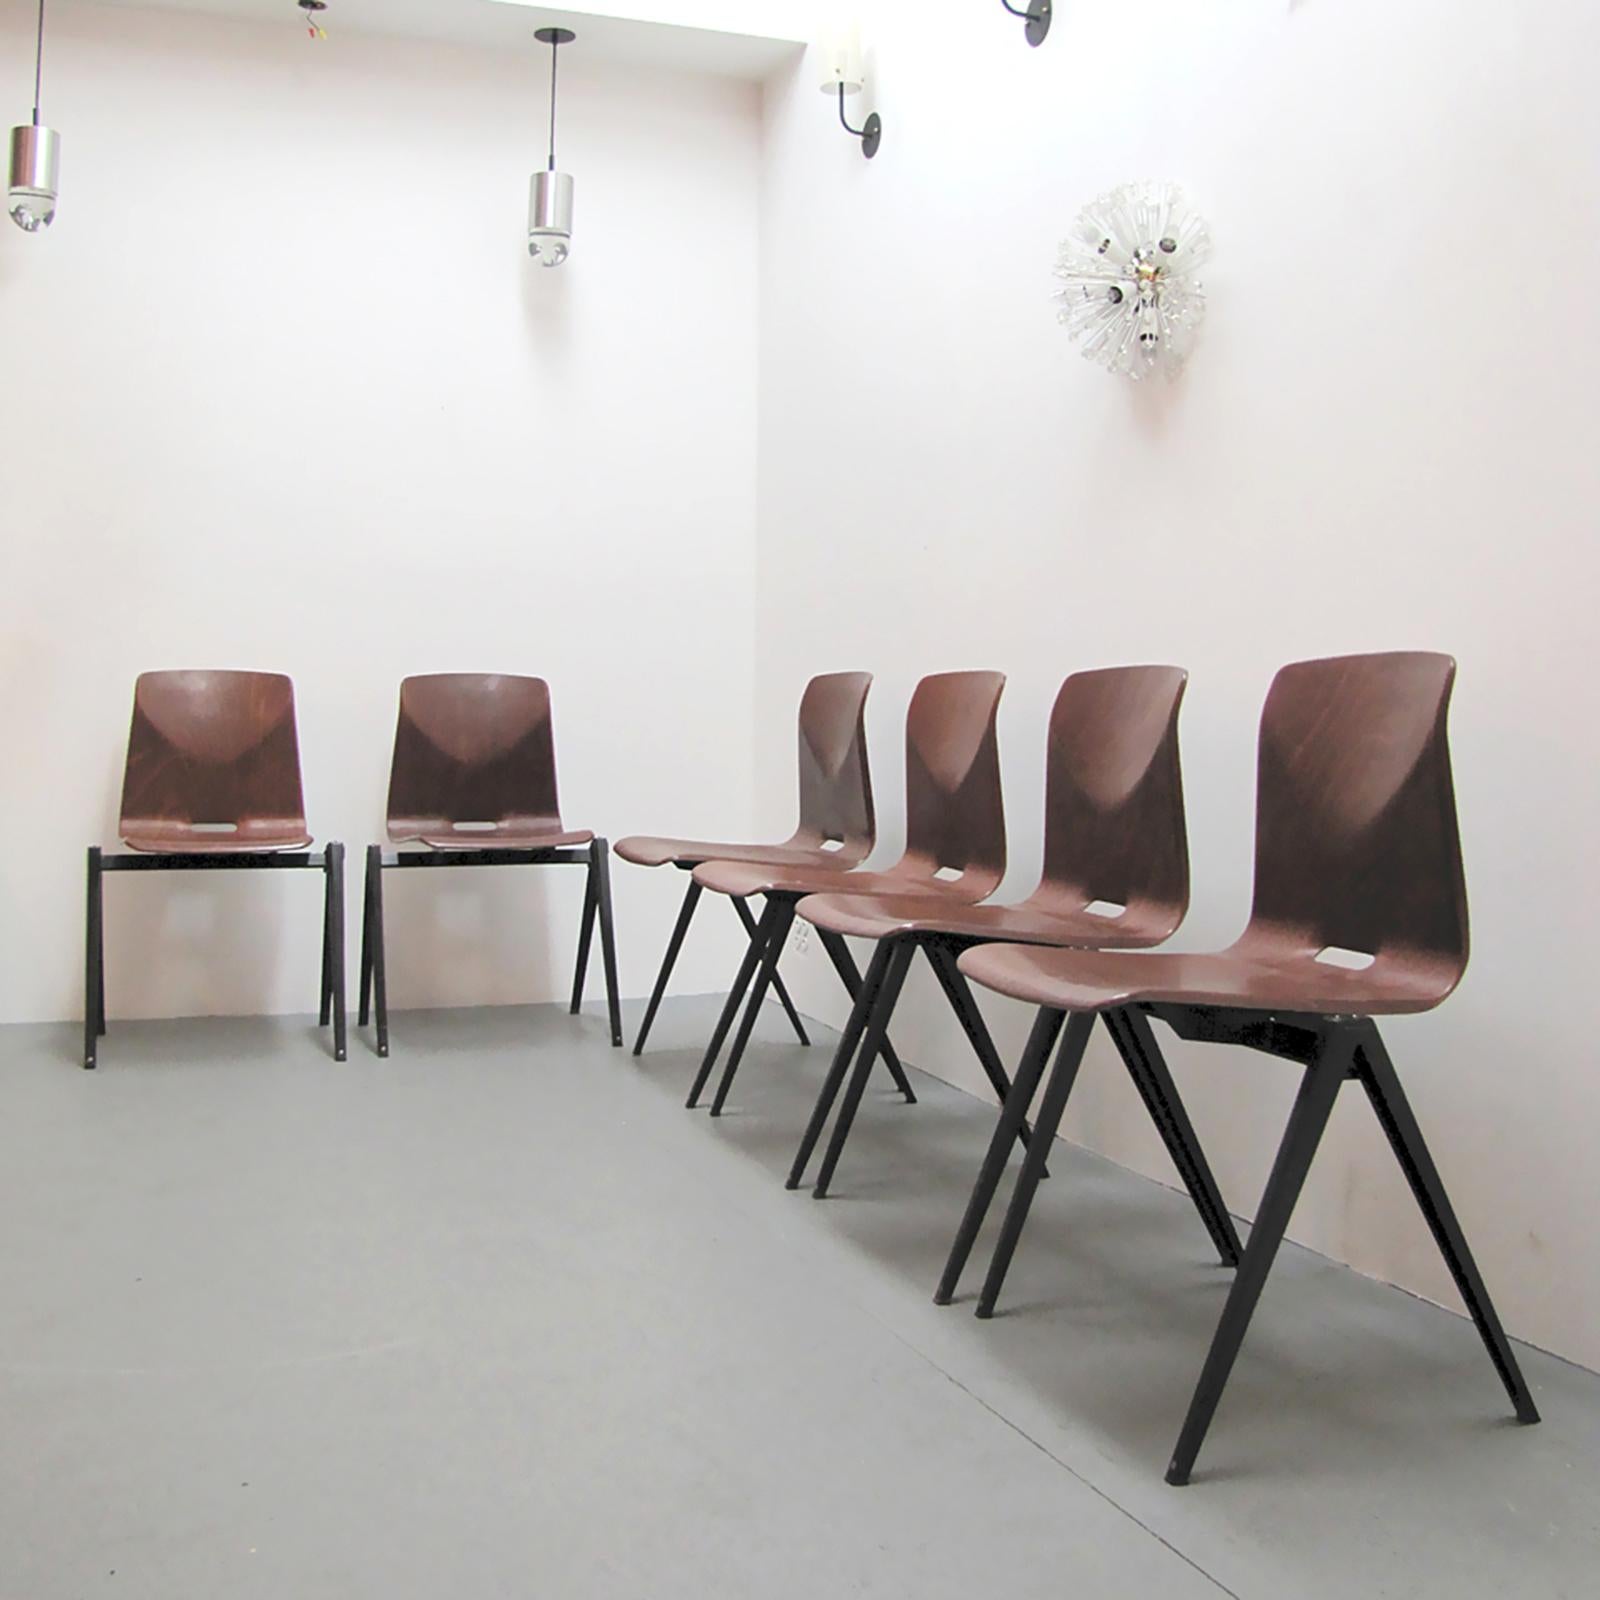 Mid-20th Century Six Industrial Dining Chairs by Galvanitas, 1960 For Sale